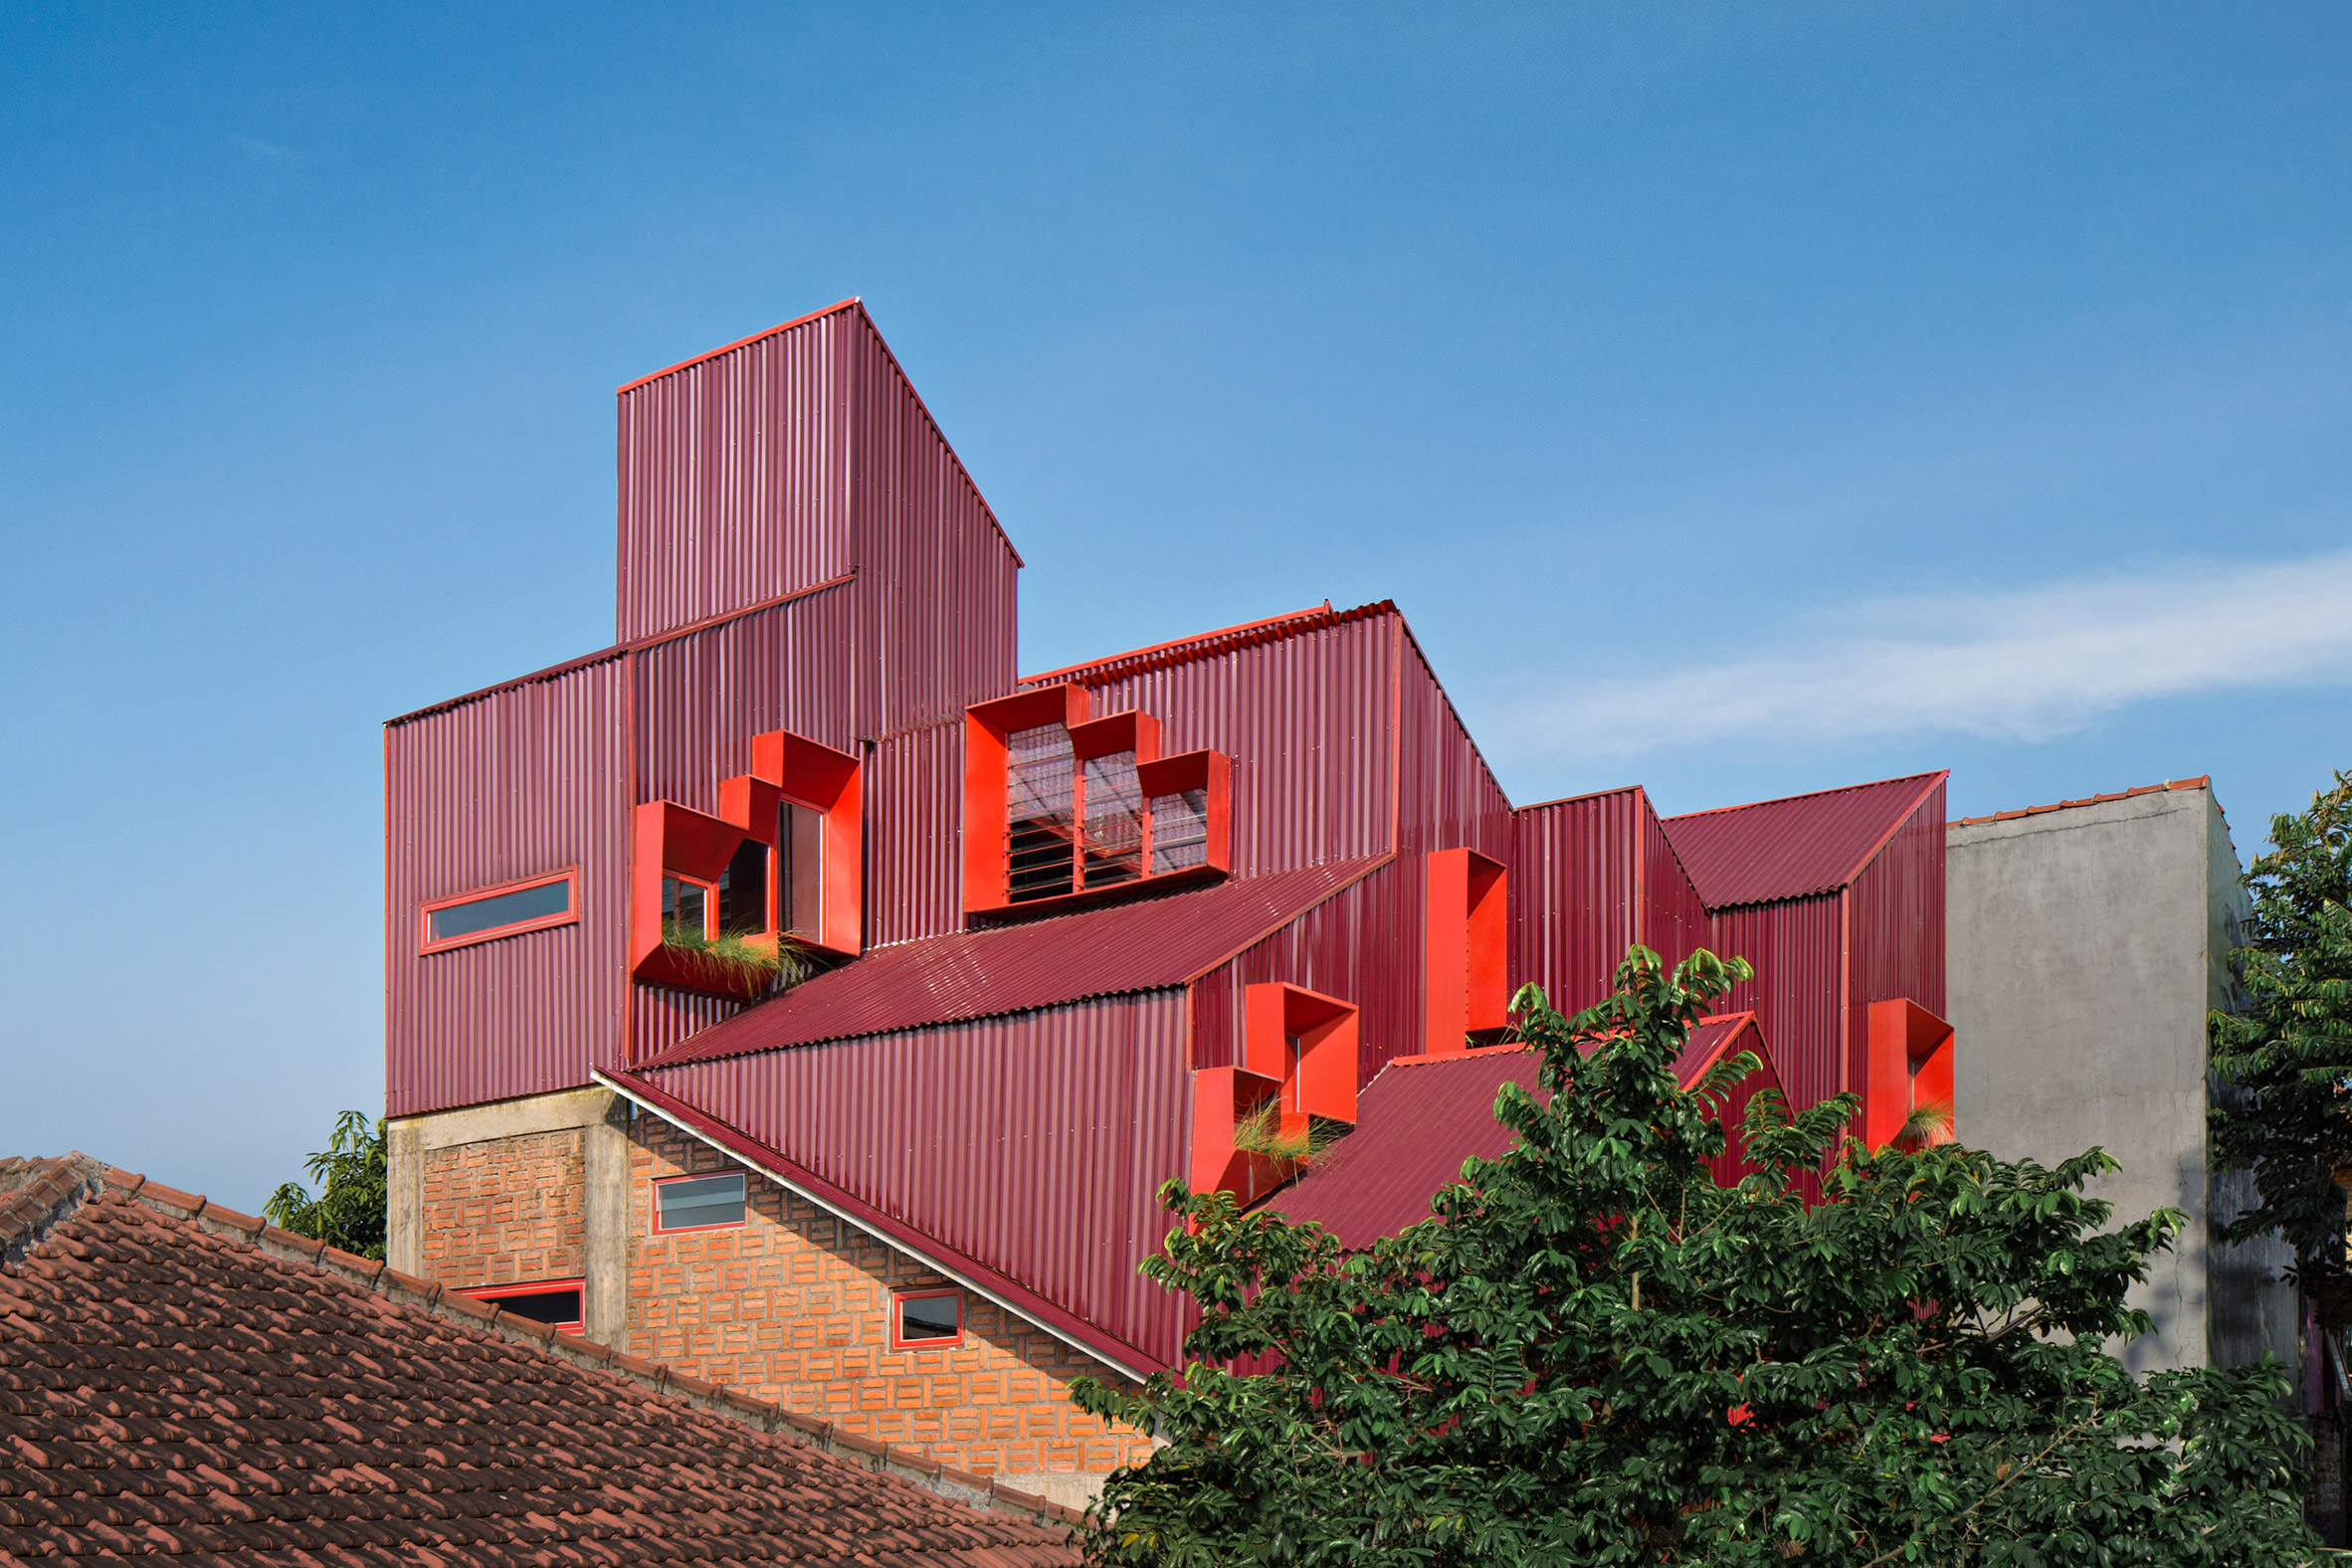 Red stacked boarding house volumes rise above the surrounding rooftops